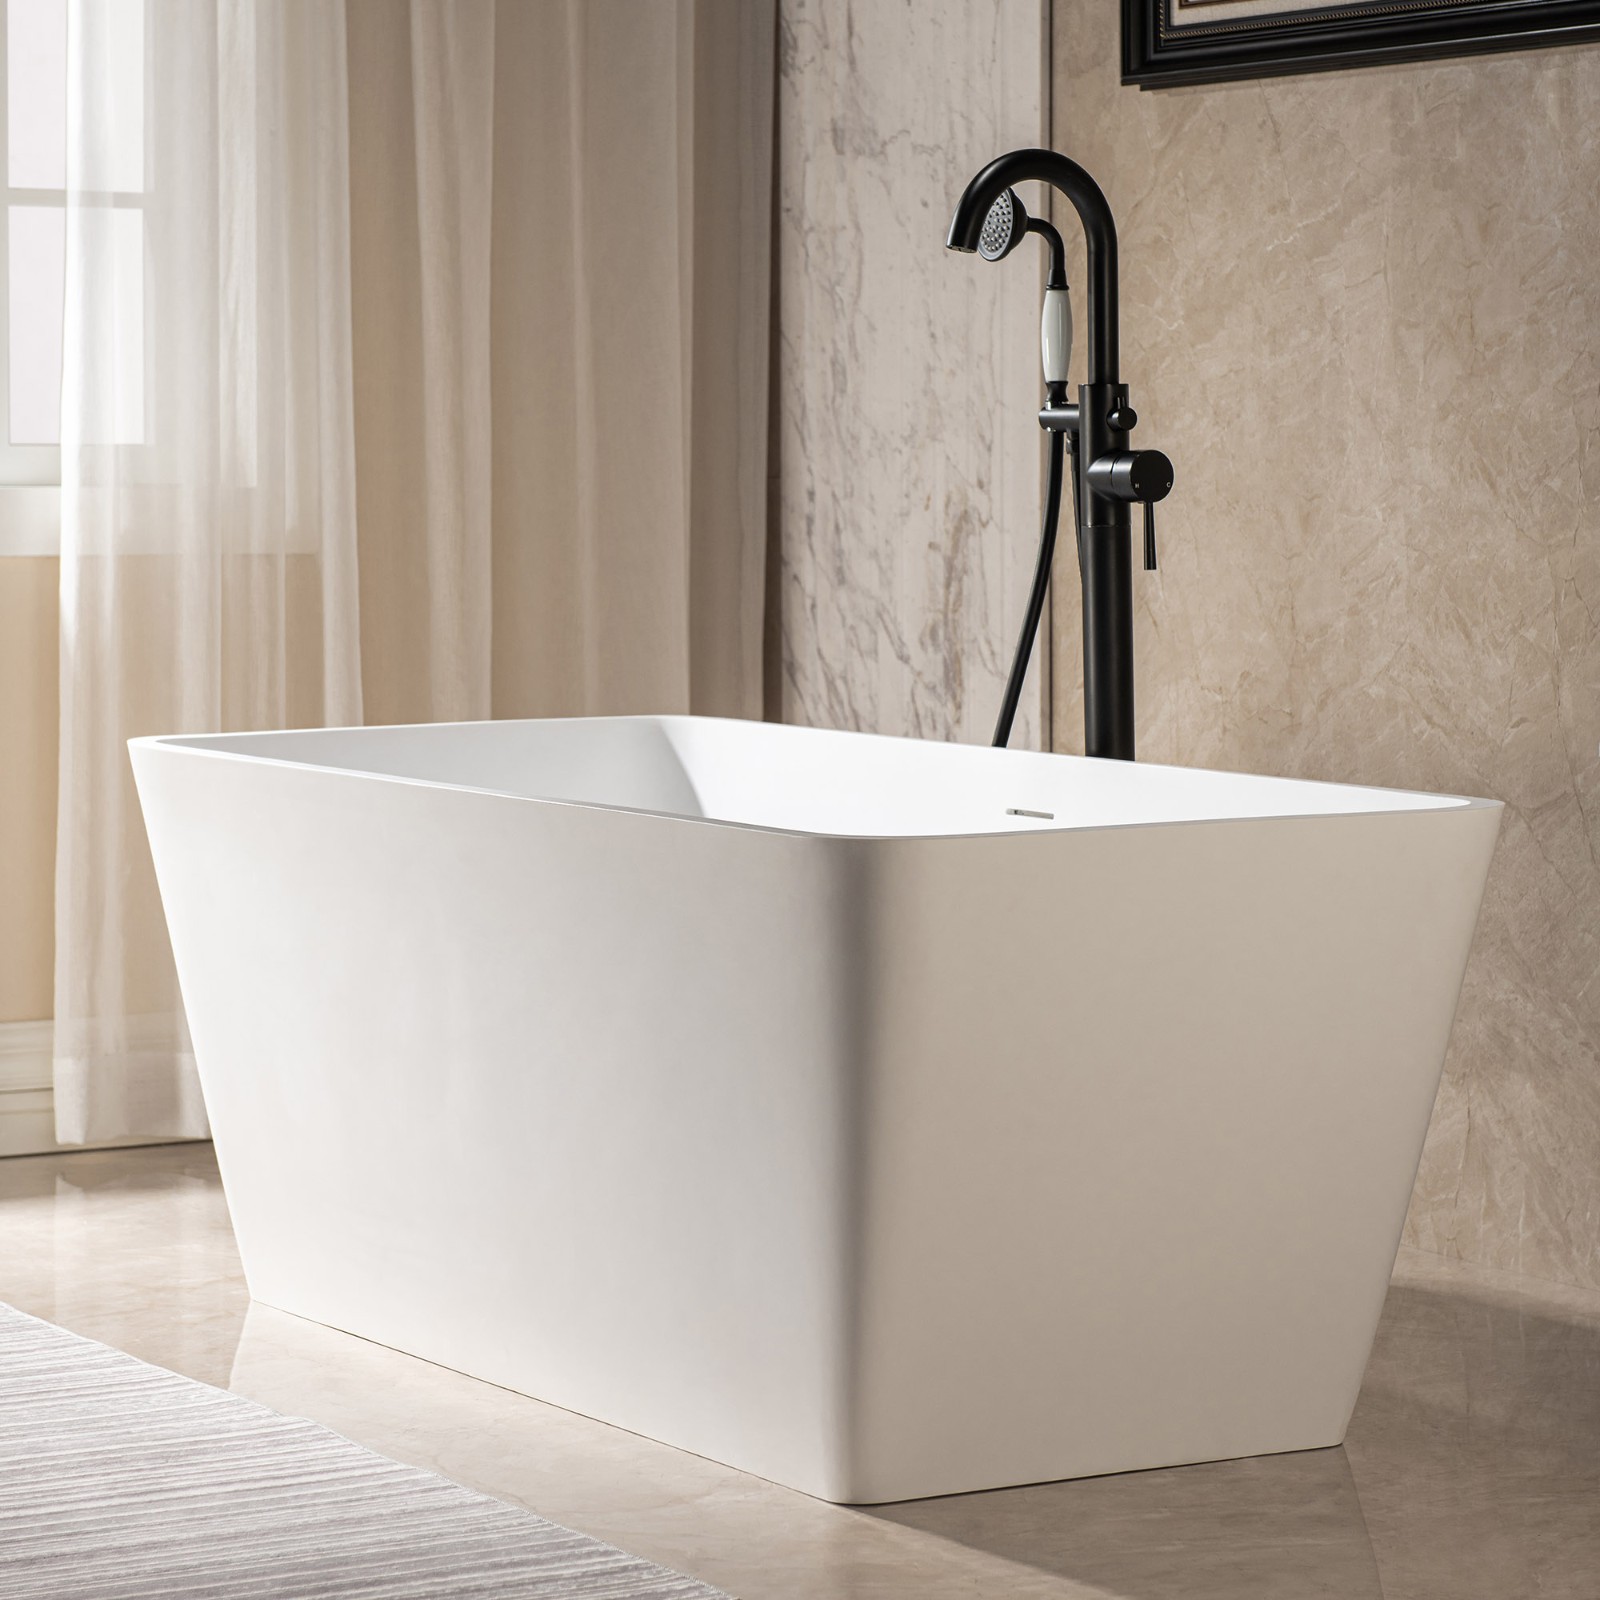  WOODBRIDGE 59 in. x 27.5 in. Luxury Contemporary Solid Surface Freestanding Bathtub in Matte White_8